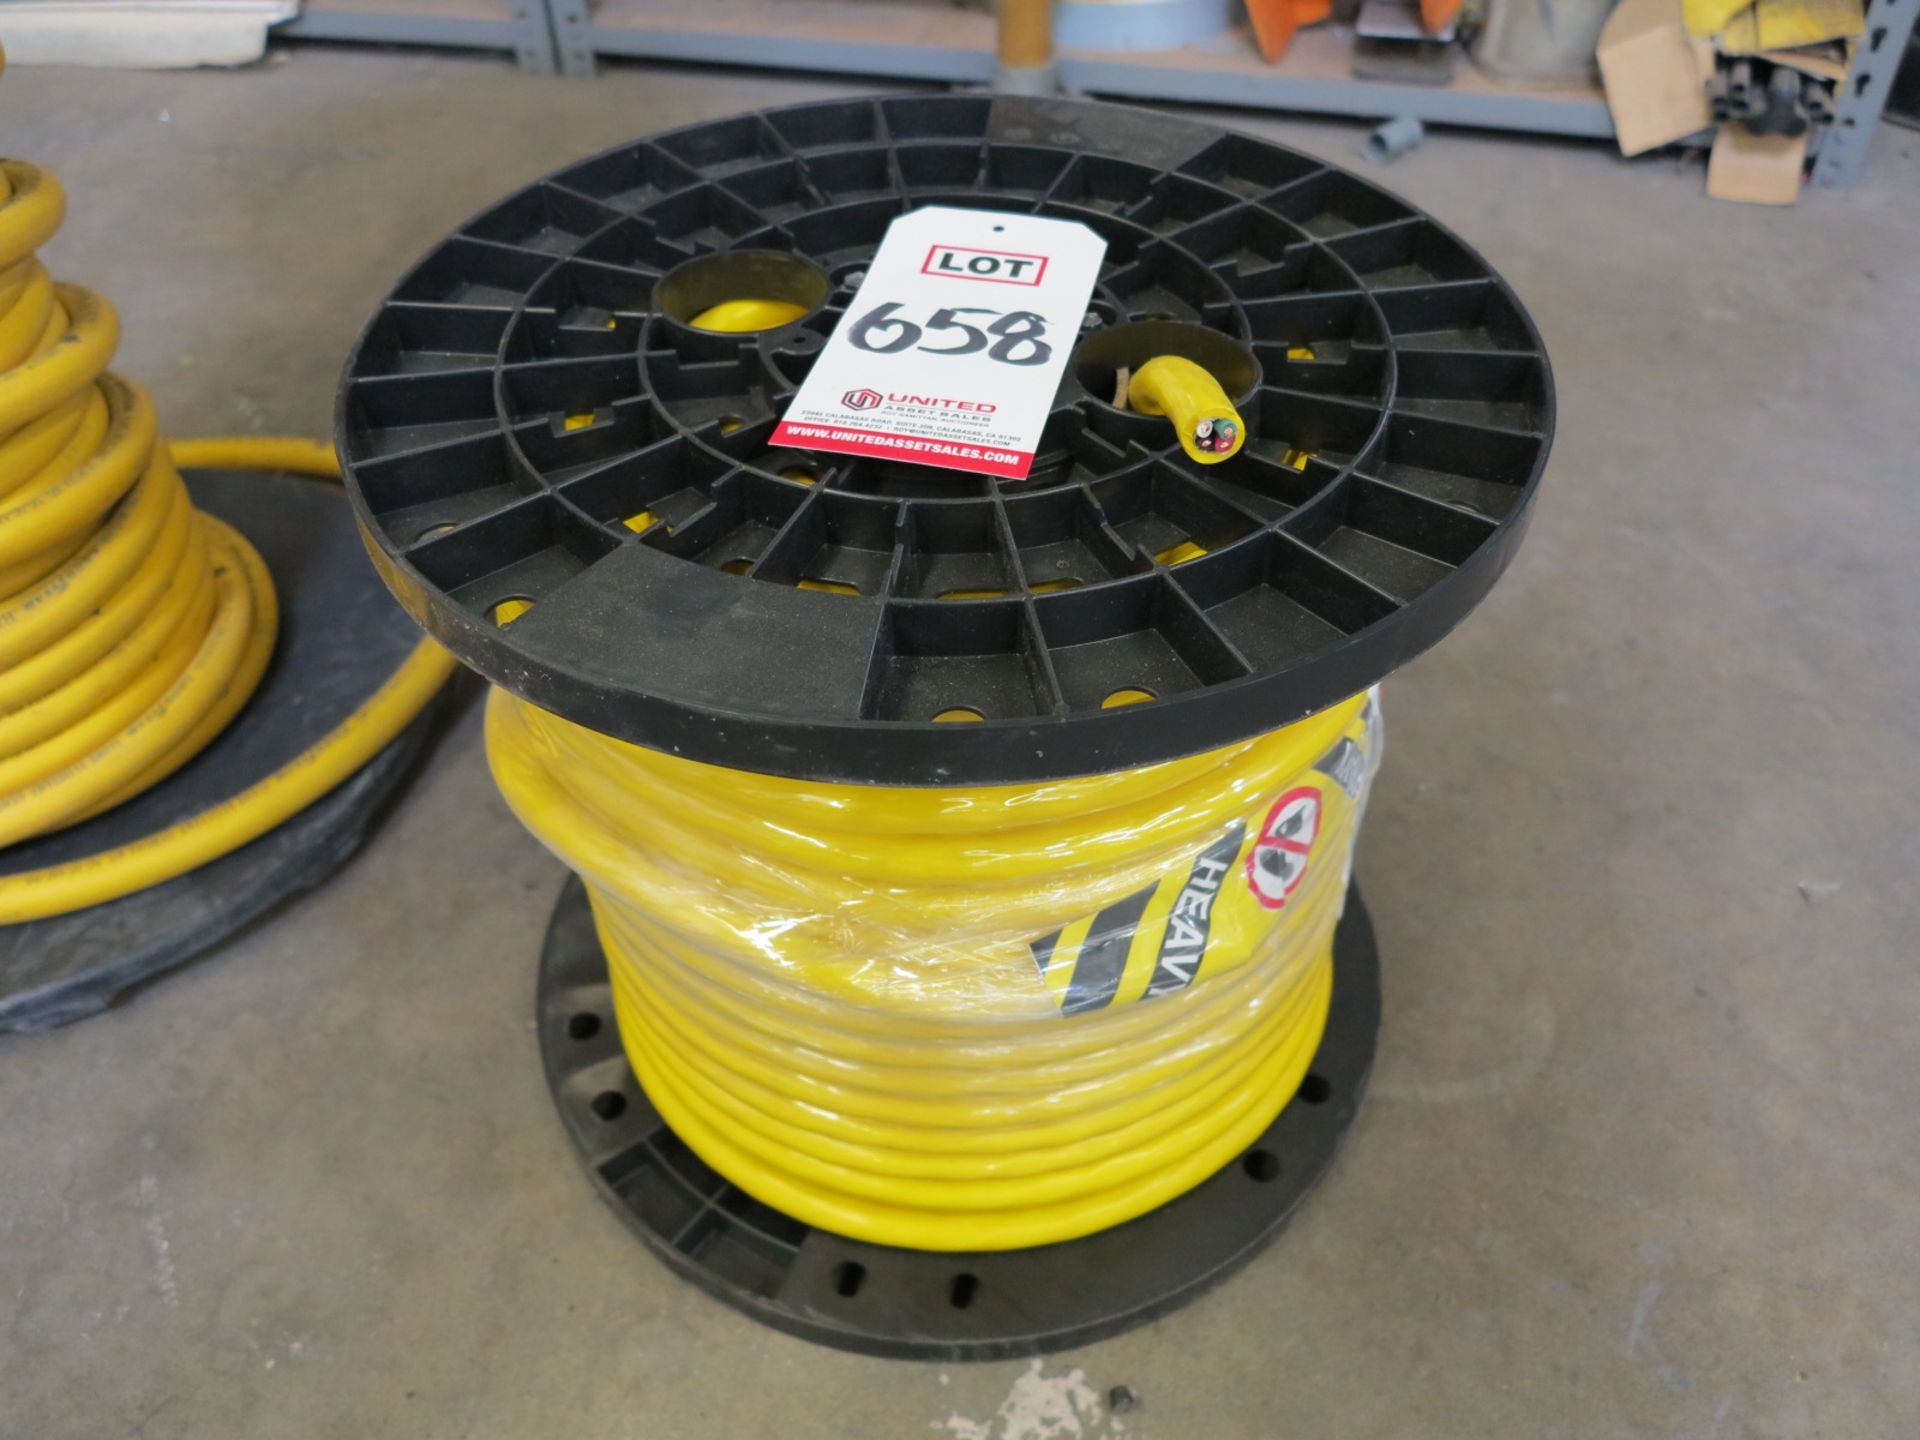 250' SPOOL OF 12 GAGE, 4-WIRE CABLE, YELLOW, NEW FULL ROLL